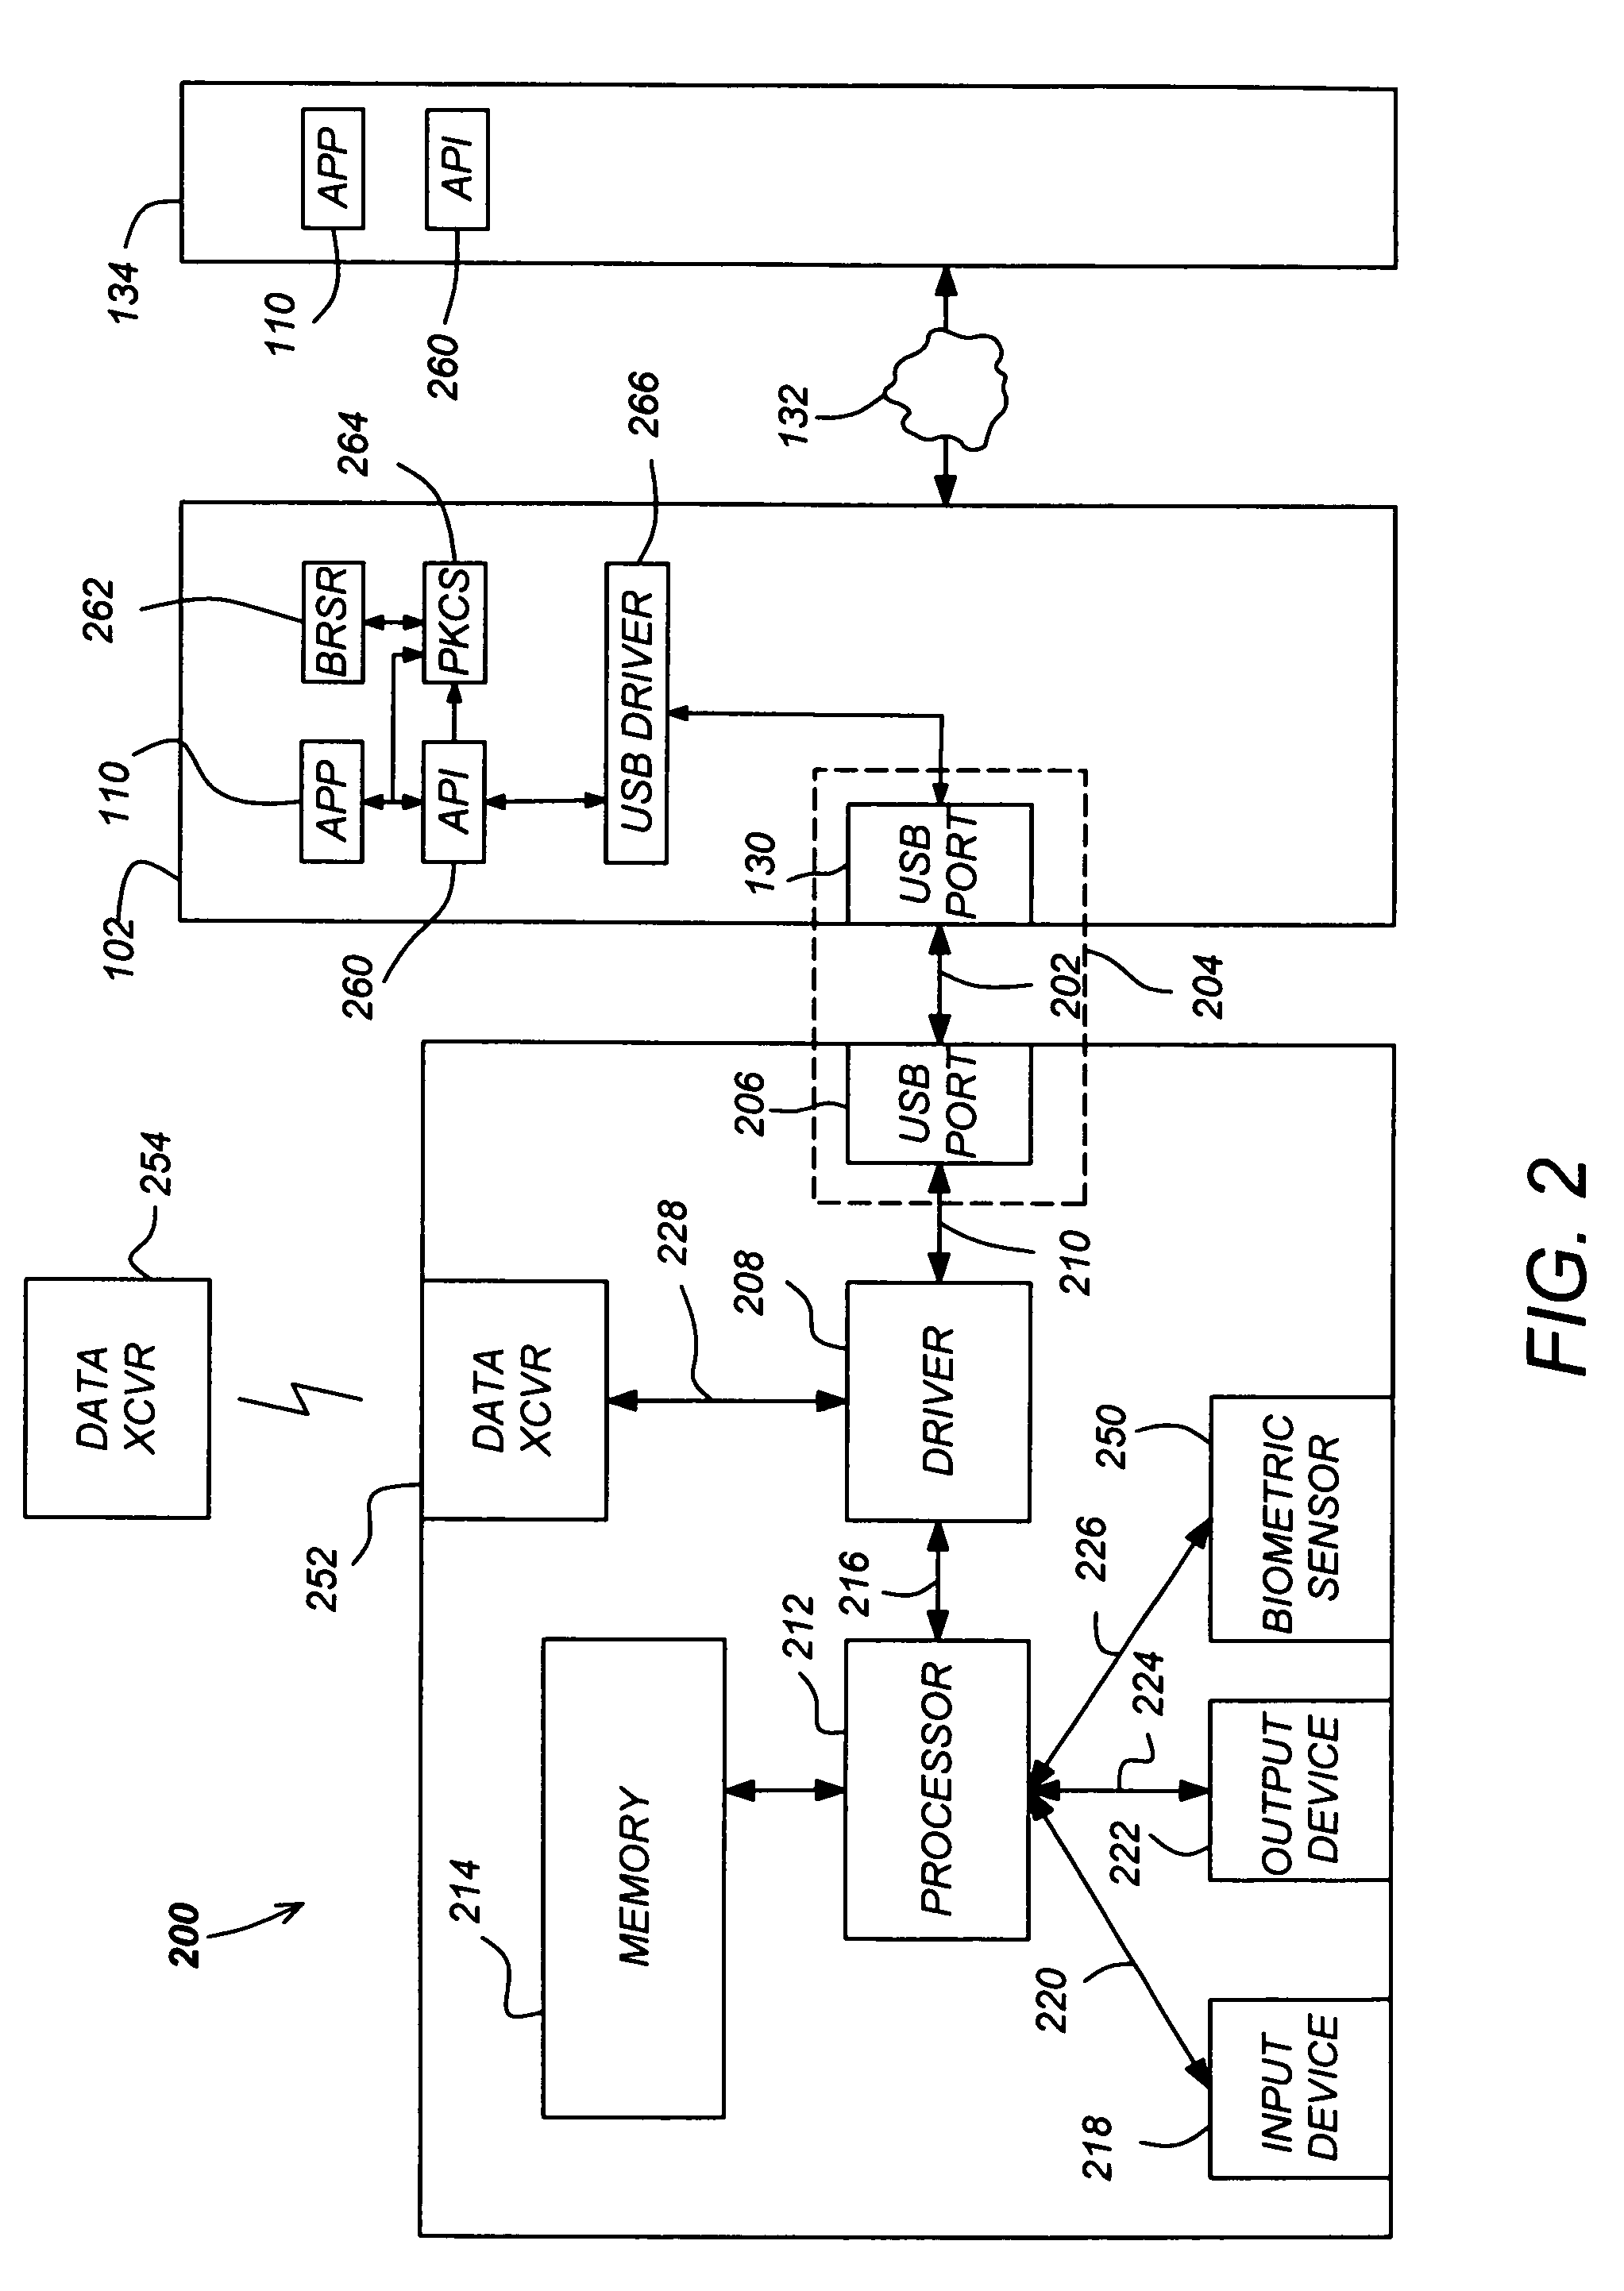 USB-compliant personal key with integral input and output devices